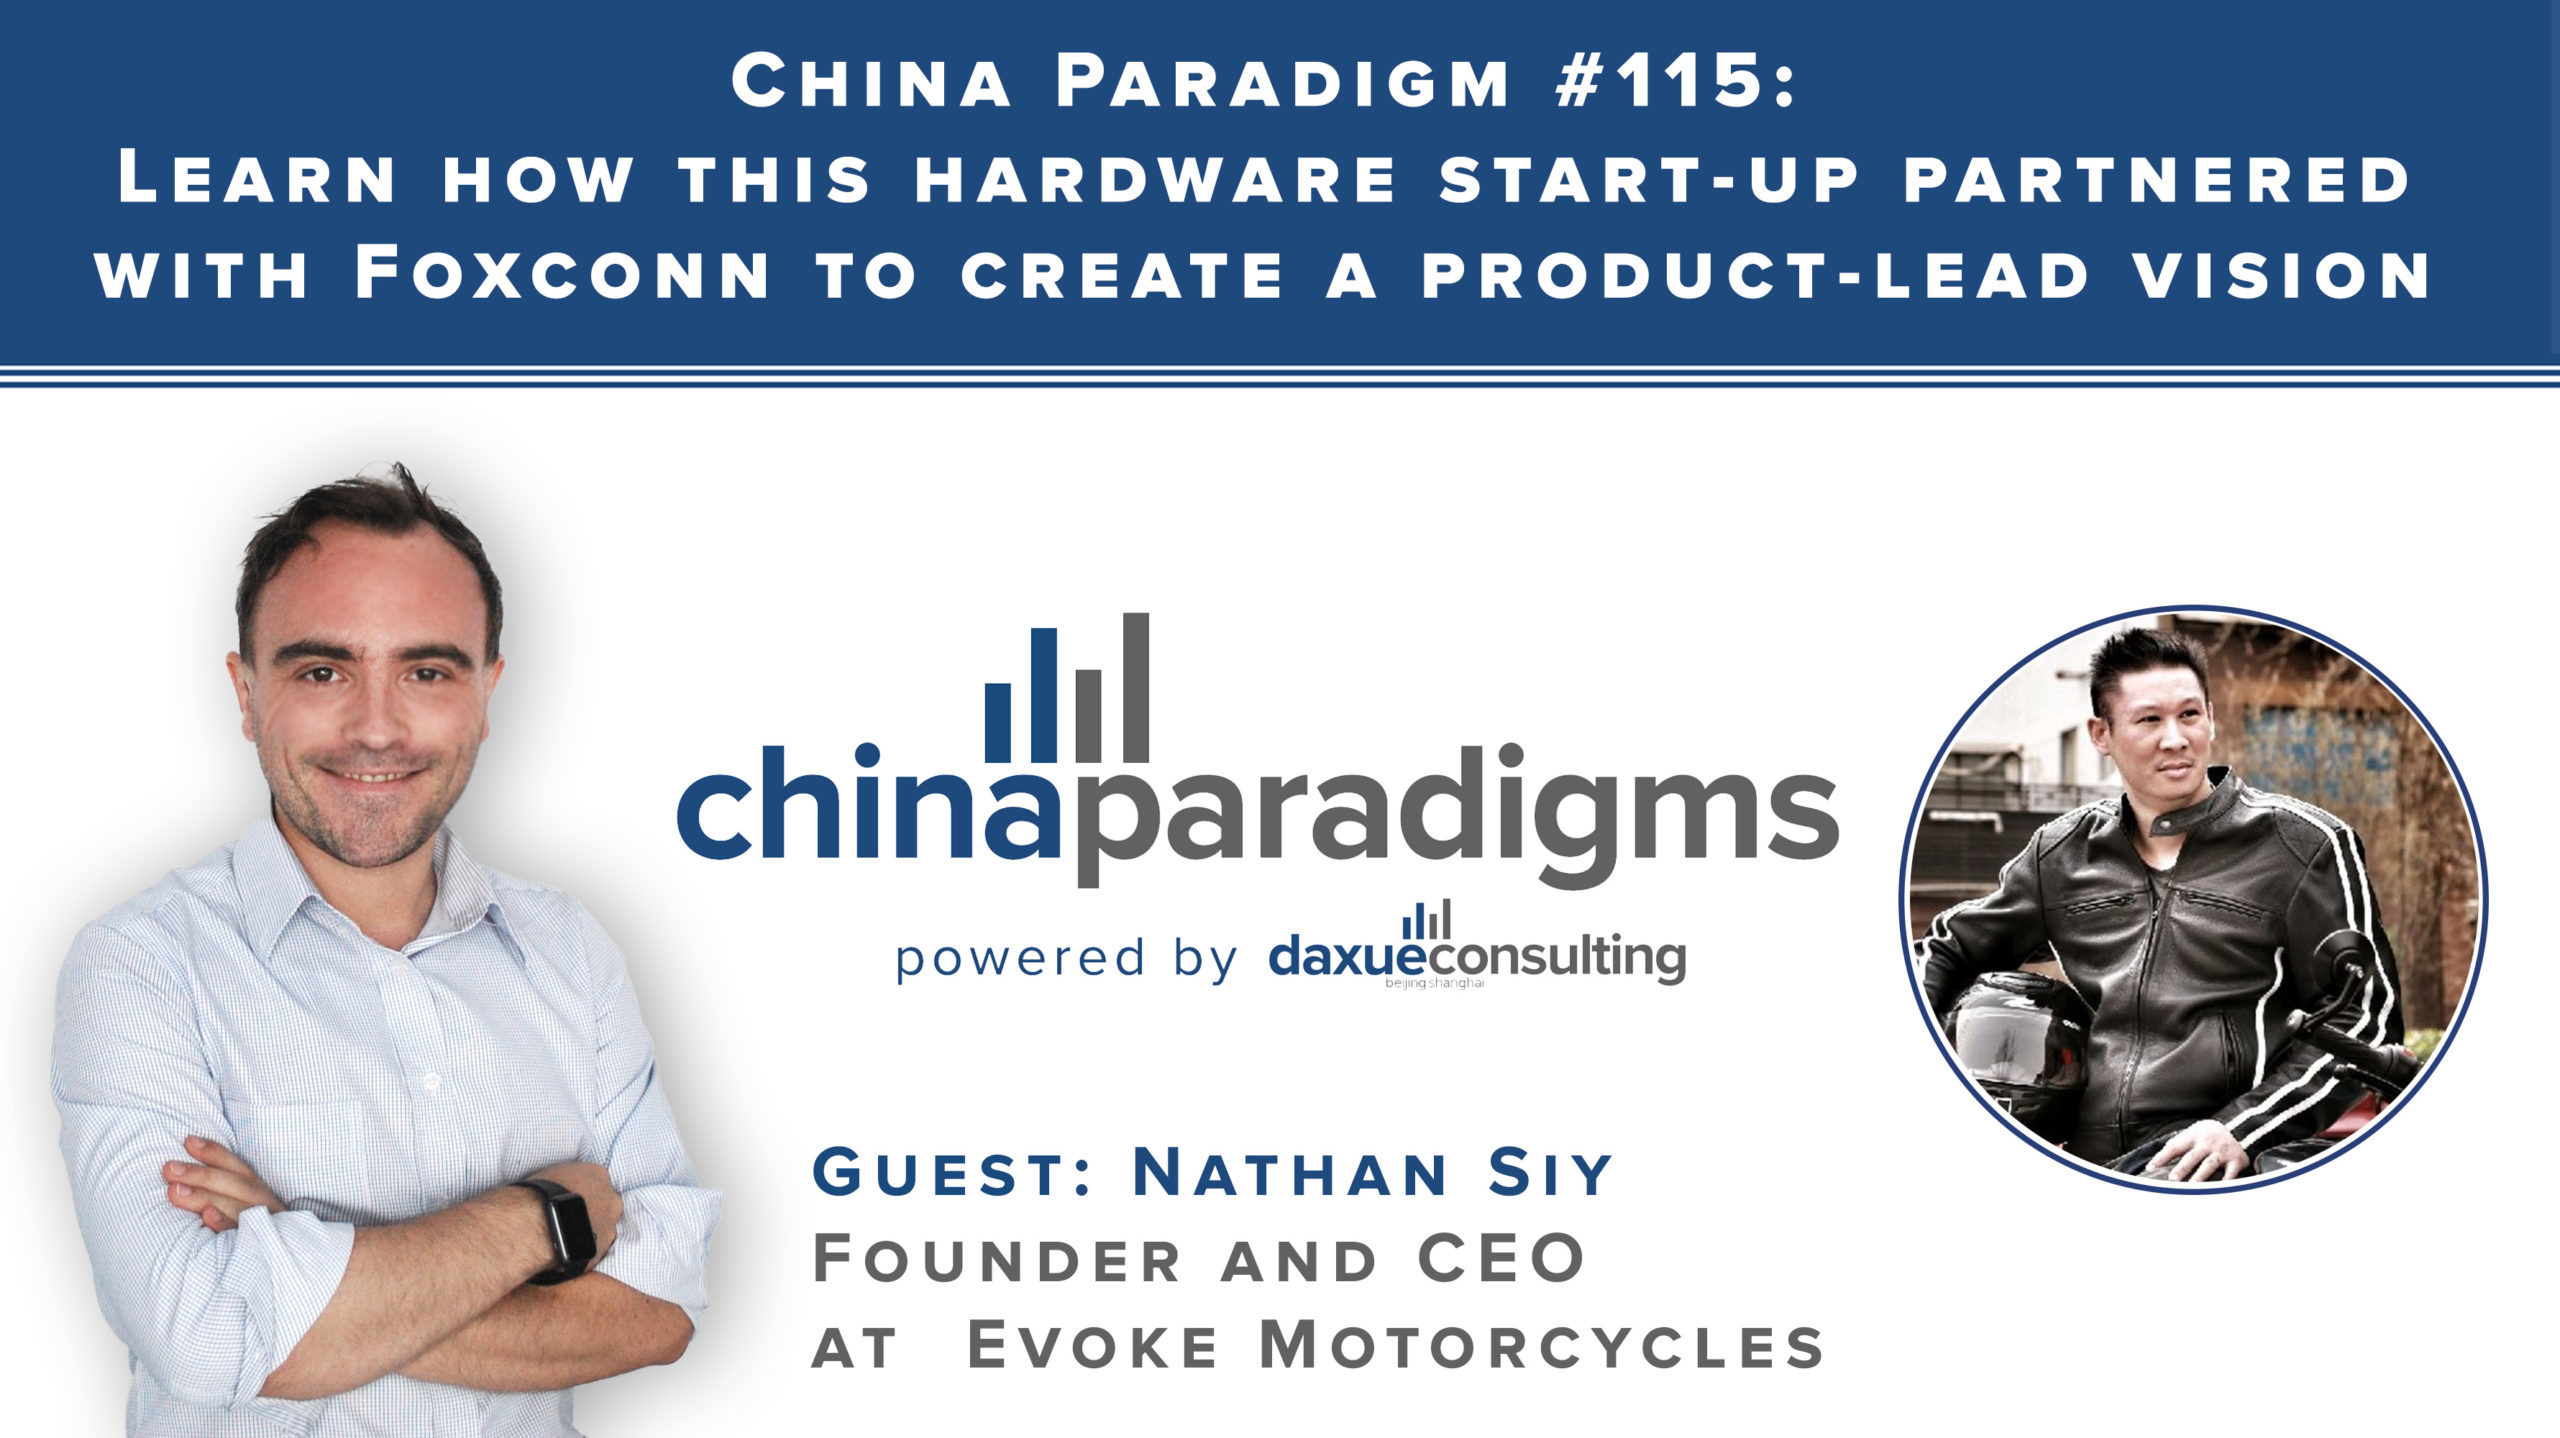 China Paradigm 115: Learn how this hardware start-up partnered with Foxconn to create a product-lead vision